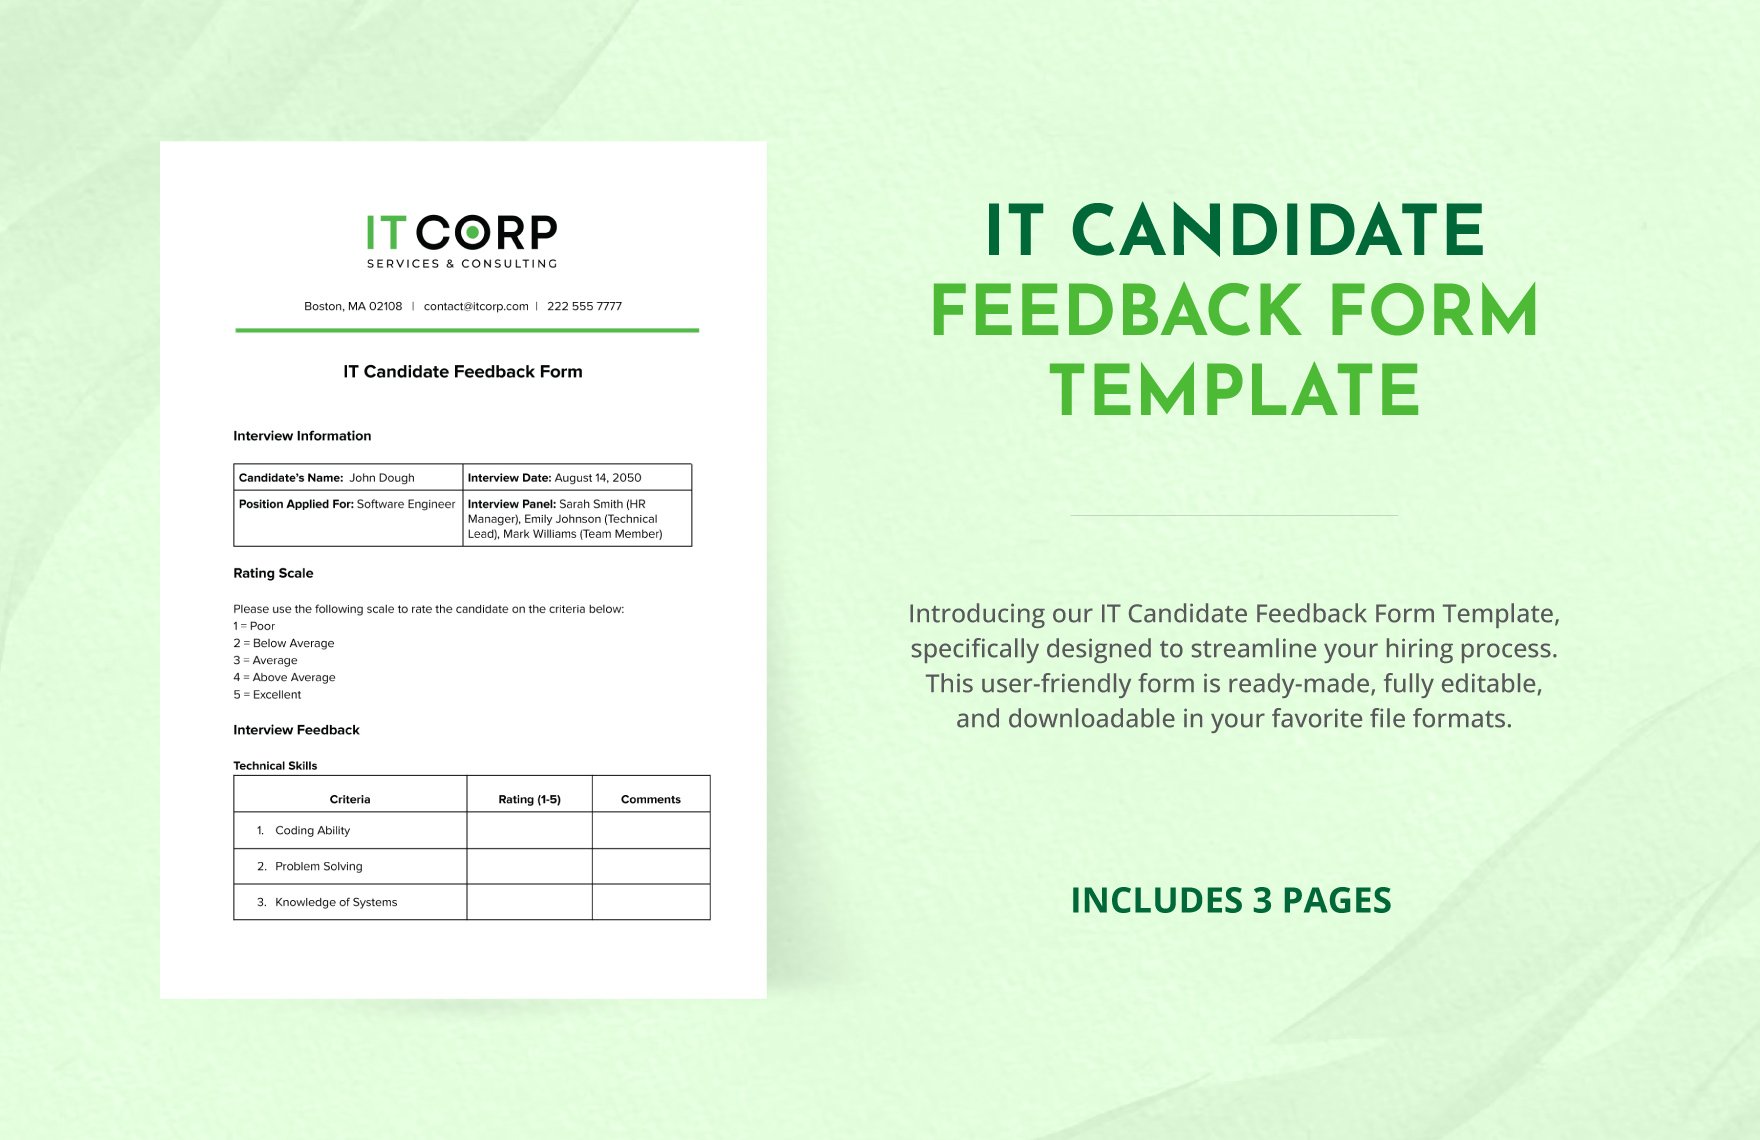 IT Candidate Feedback Form Template